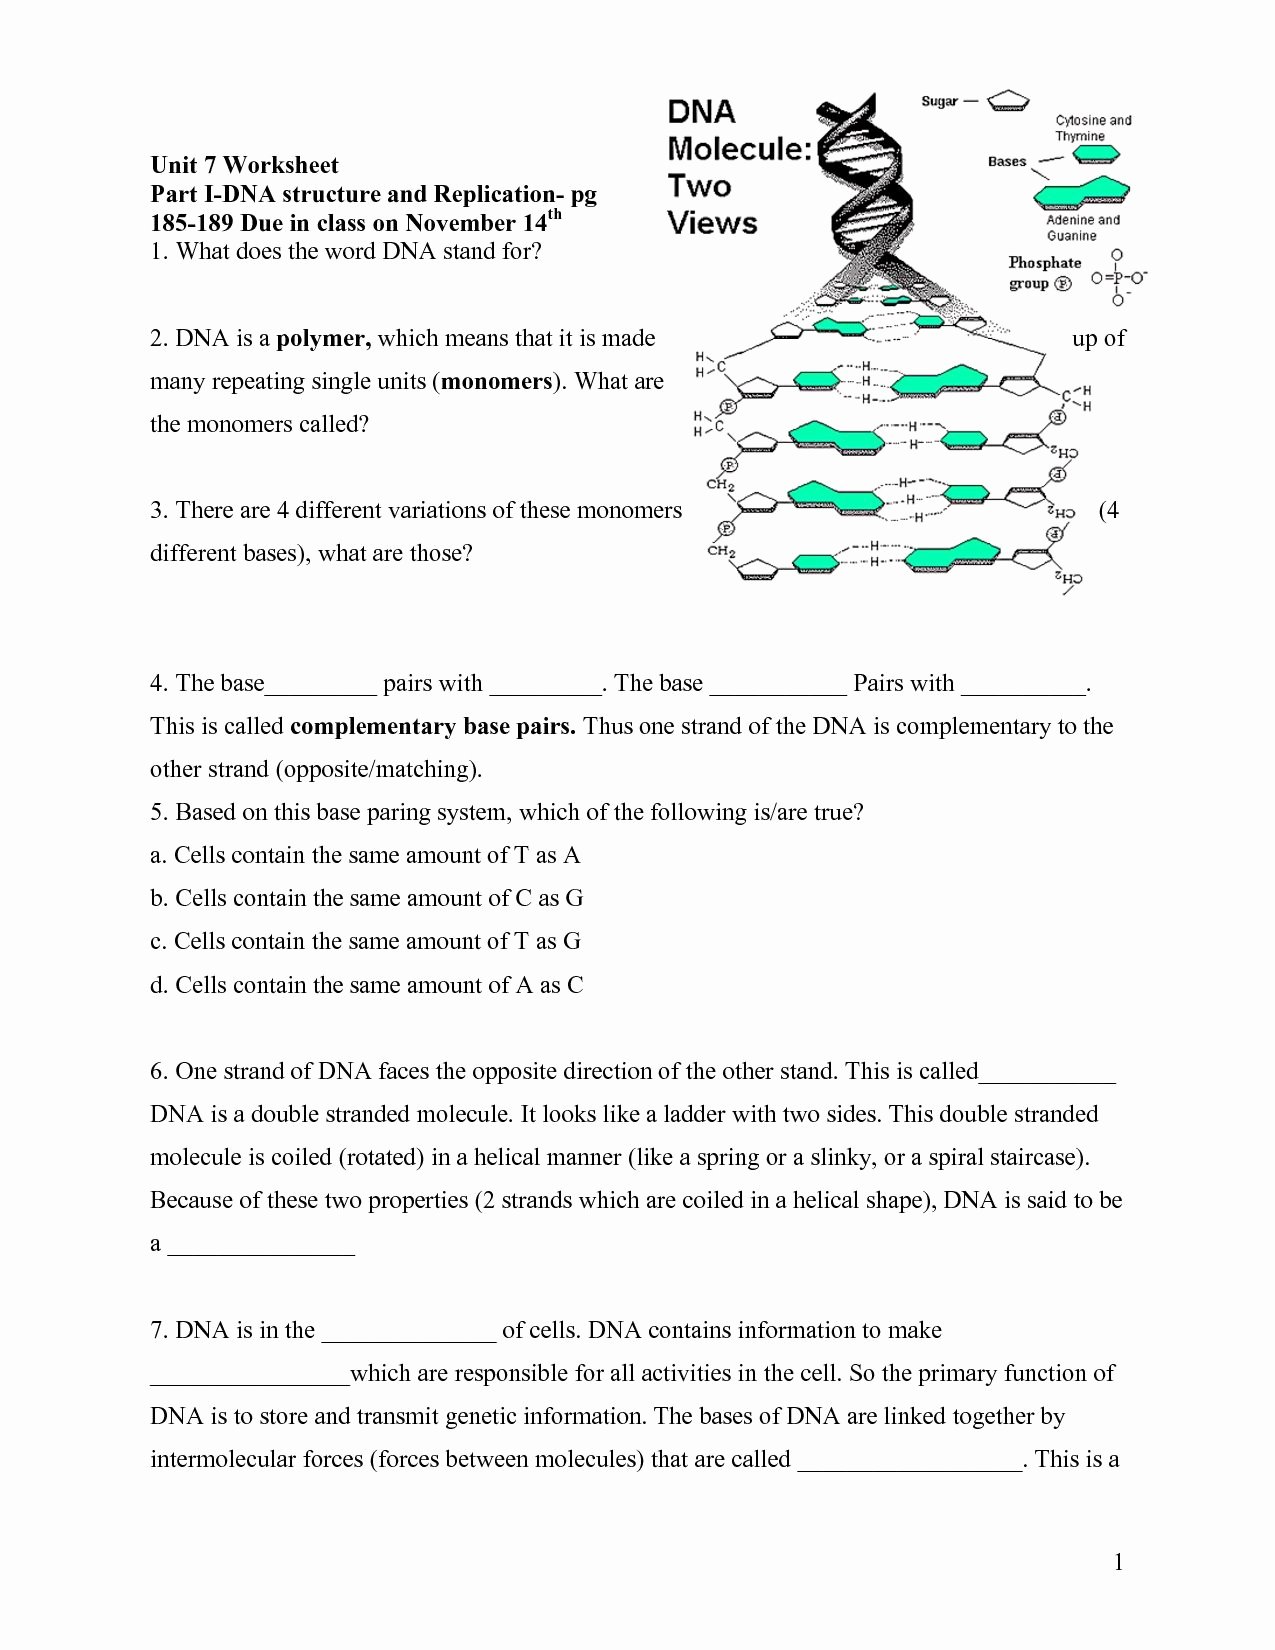 Protein Synthesis Review Worksheet Answers Inspirational Dna Rna and Protein Synthesis Worksheet Answer Key